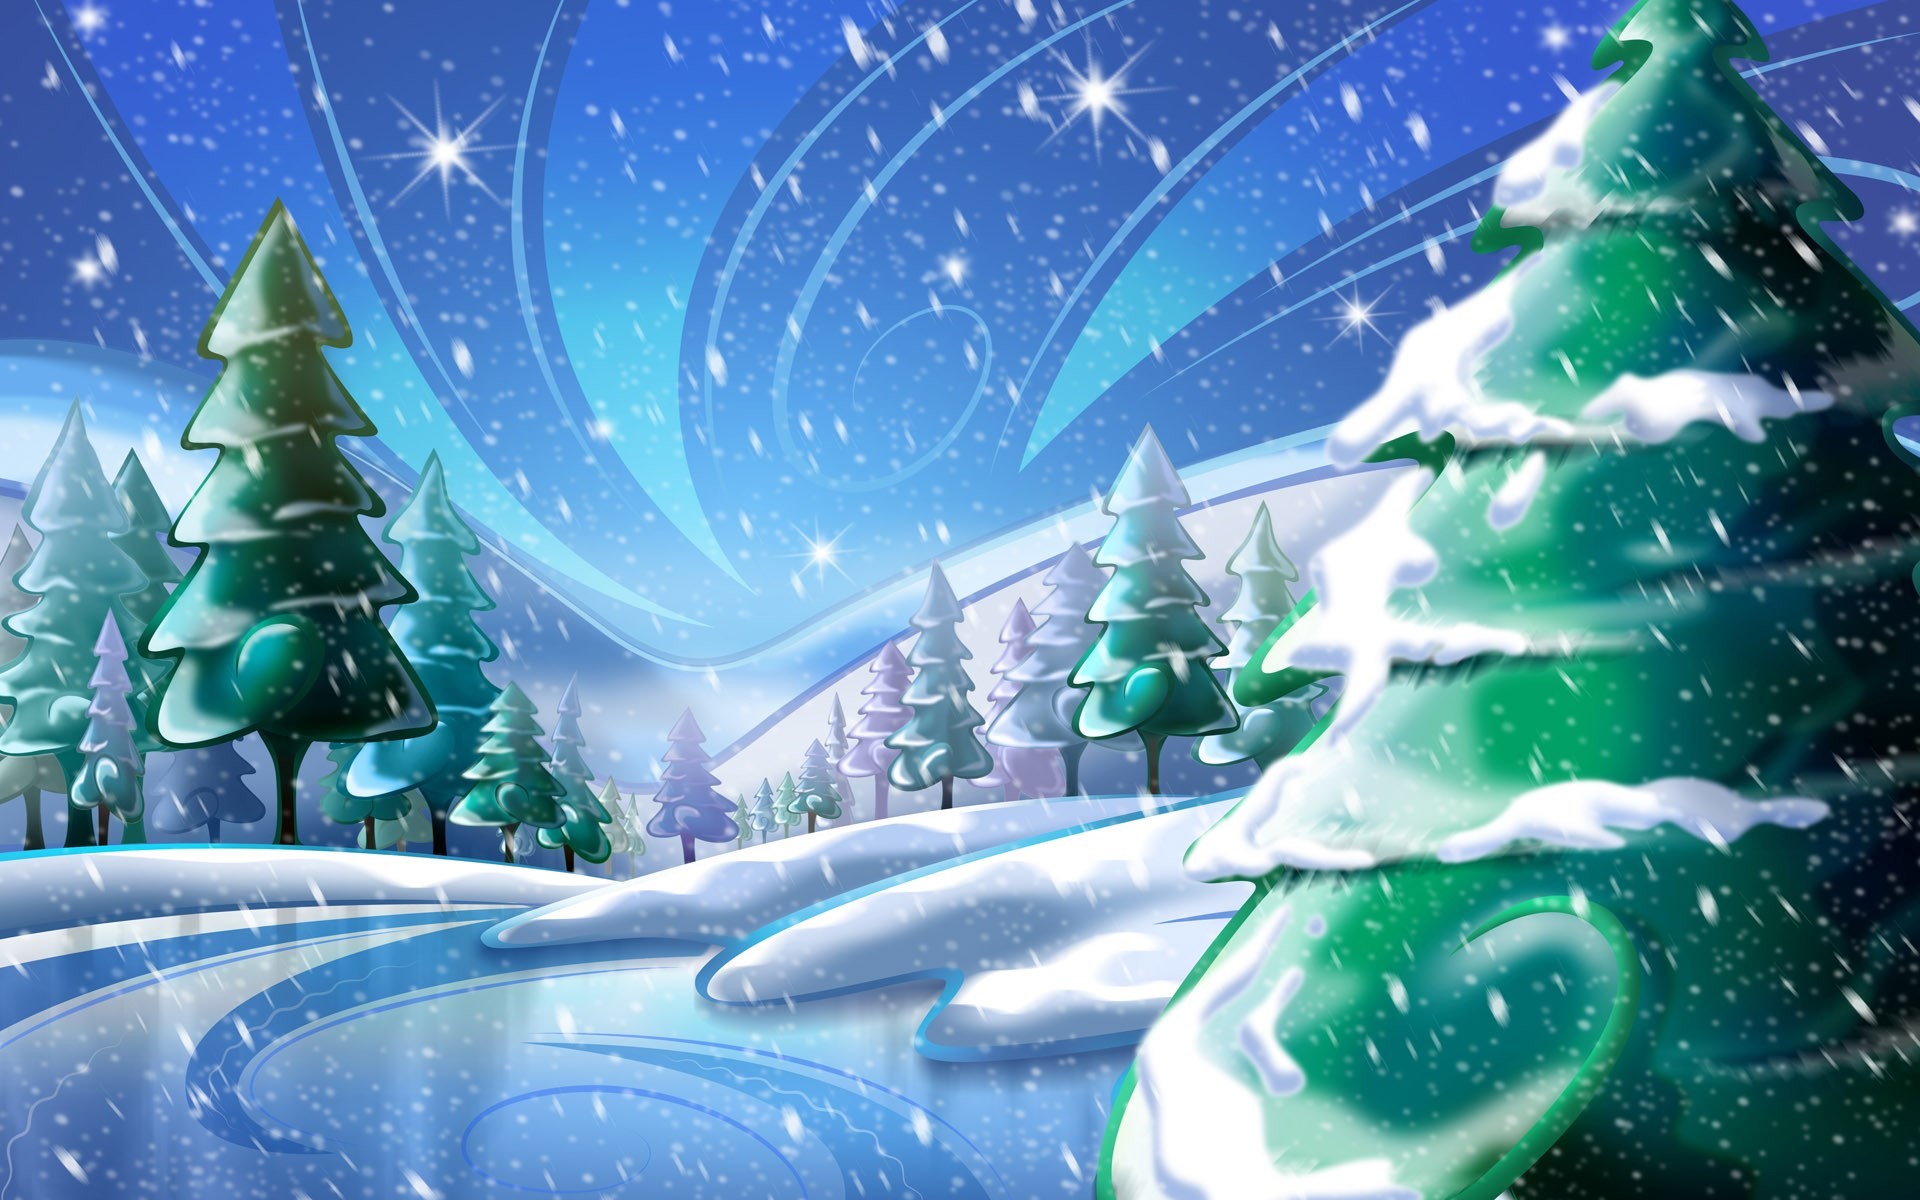 2017 03 03 – winter theme background images,